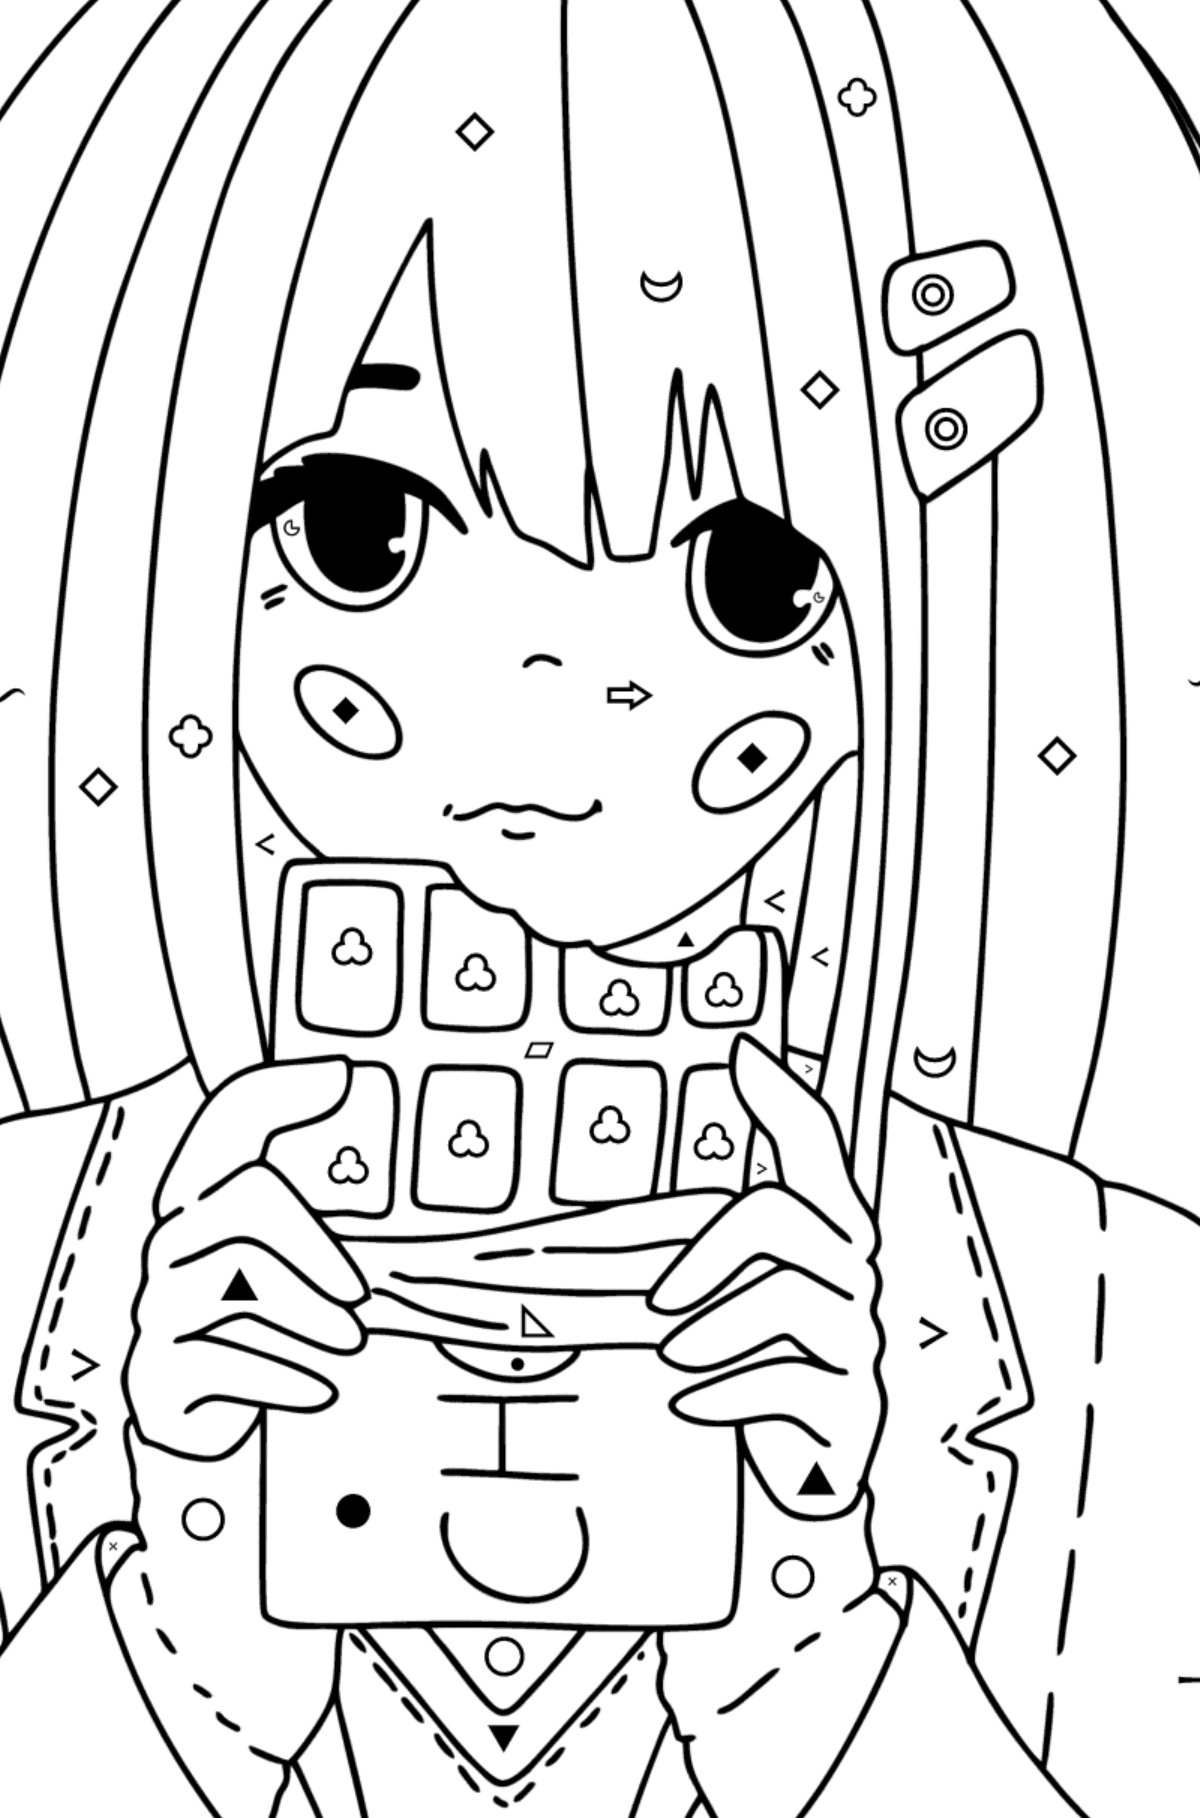 Coloring page charming anime girl - Coloring by Symbols and Geometric Shapes for Kids